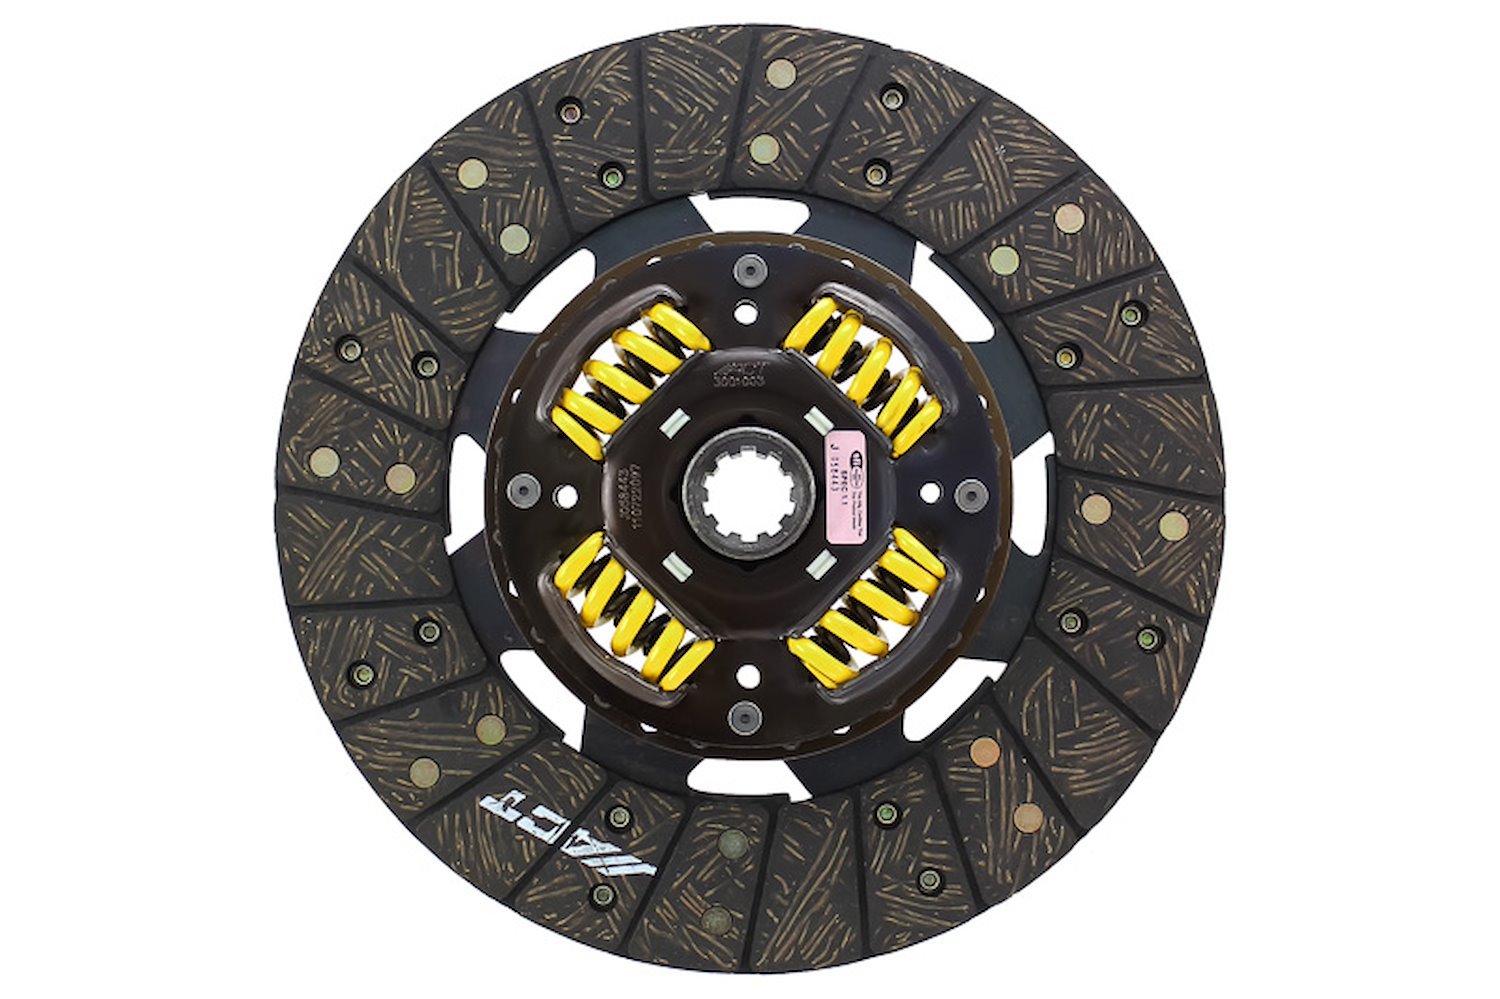 Performance Street Sprung Disc Transmission Clutch Friction Plate